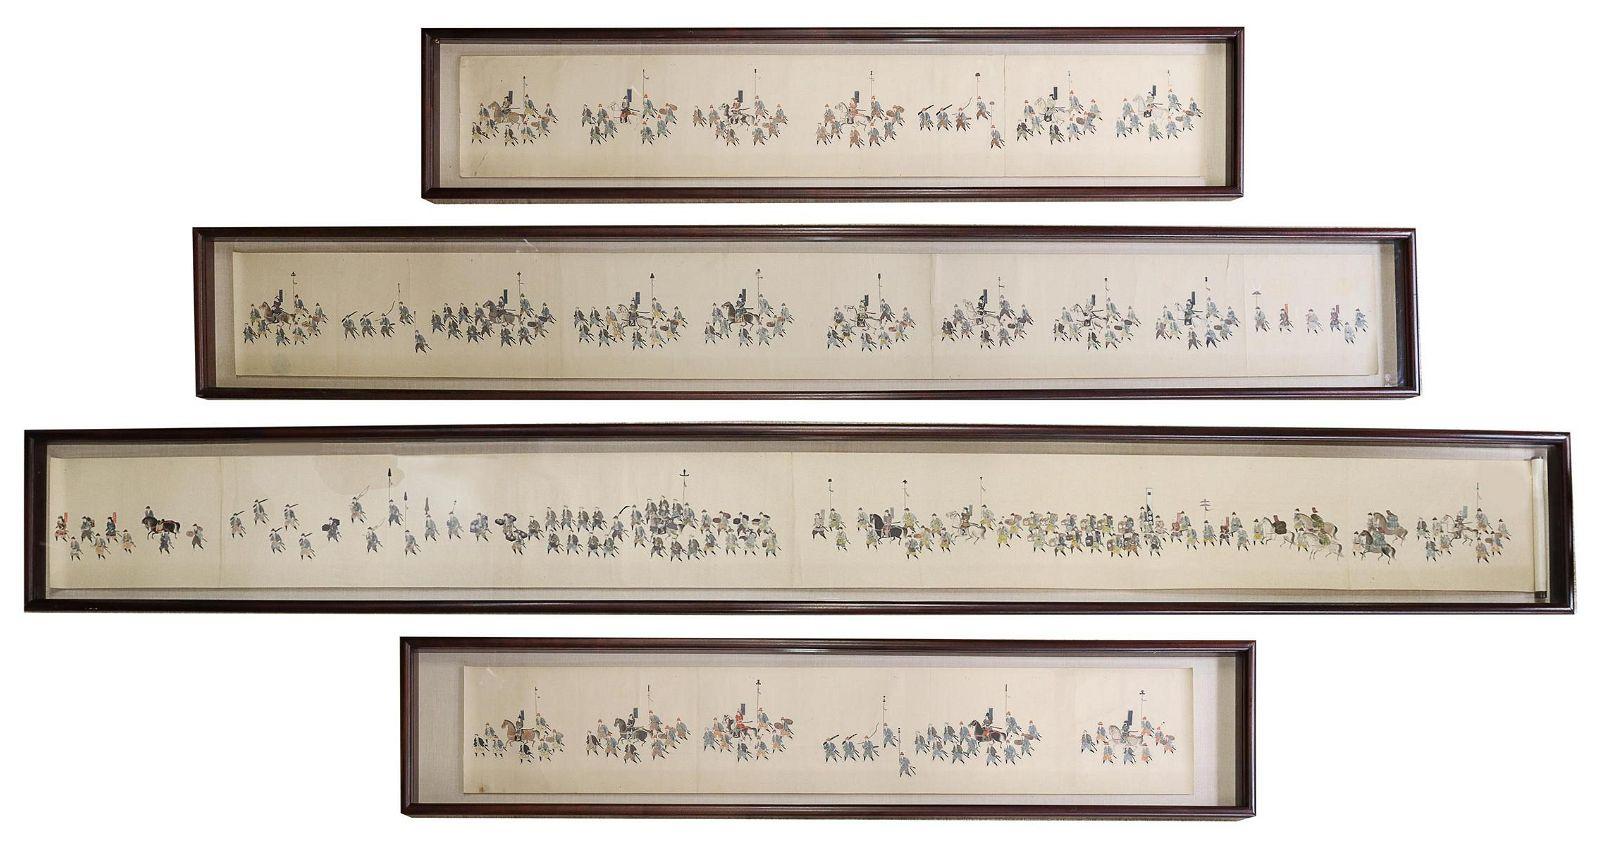 Very unique and rare museum quality professionally framed Japanese Daimyo procession hand scroll, likely Meiji Period (1868-1911). The set of 4 scrolls feature ink and color figural scenes on paper, now mounted in four sections. 
The scrolls